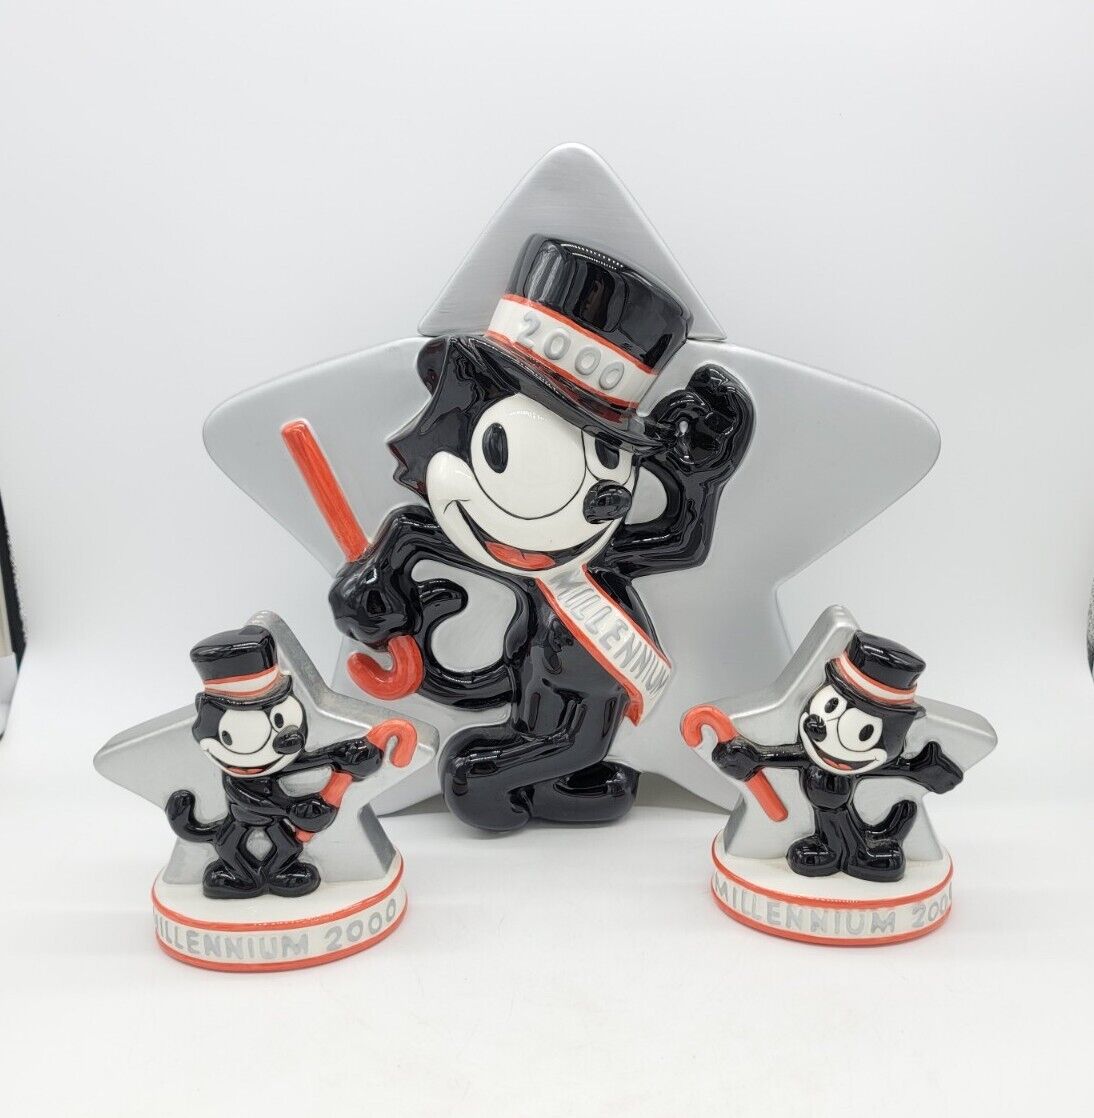 FELIX THE CAT Kitty Ceramic Cookie Jar & Shakers By Clay Art 2000 Millennium 